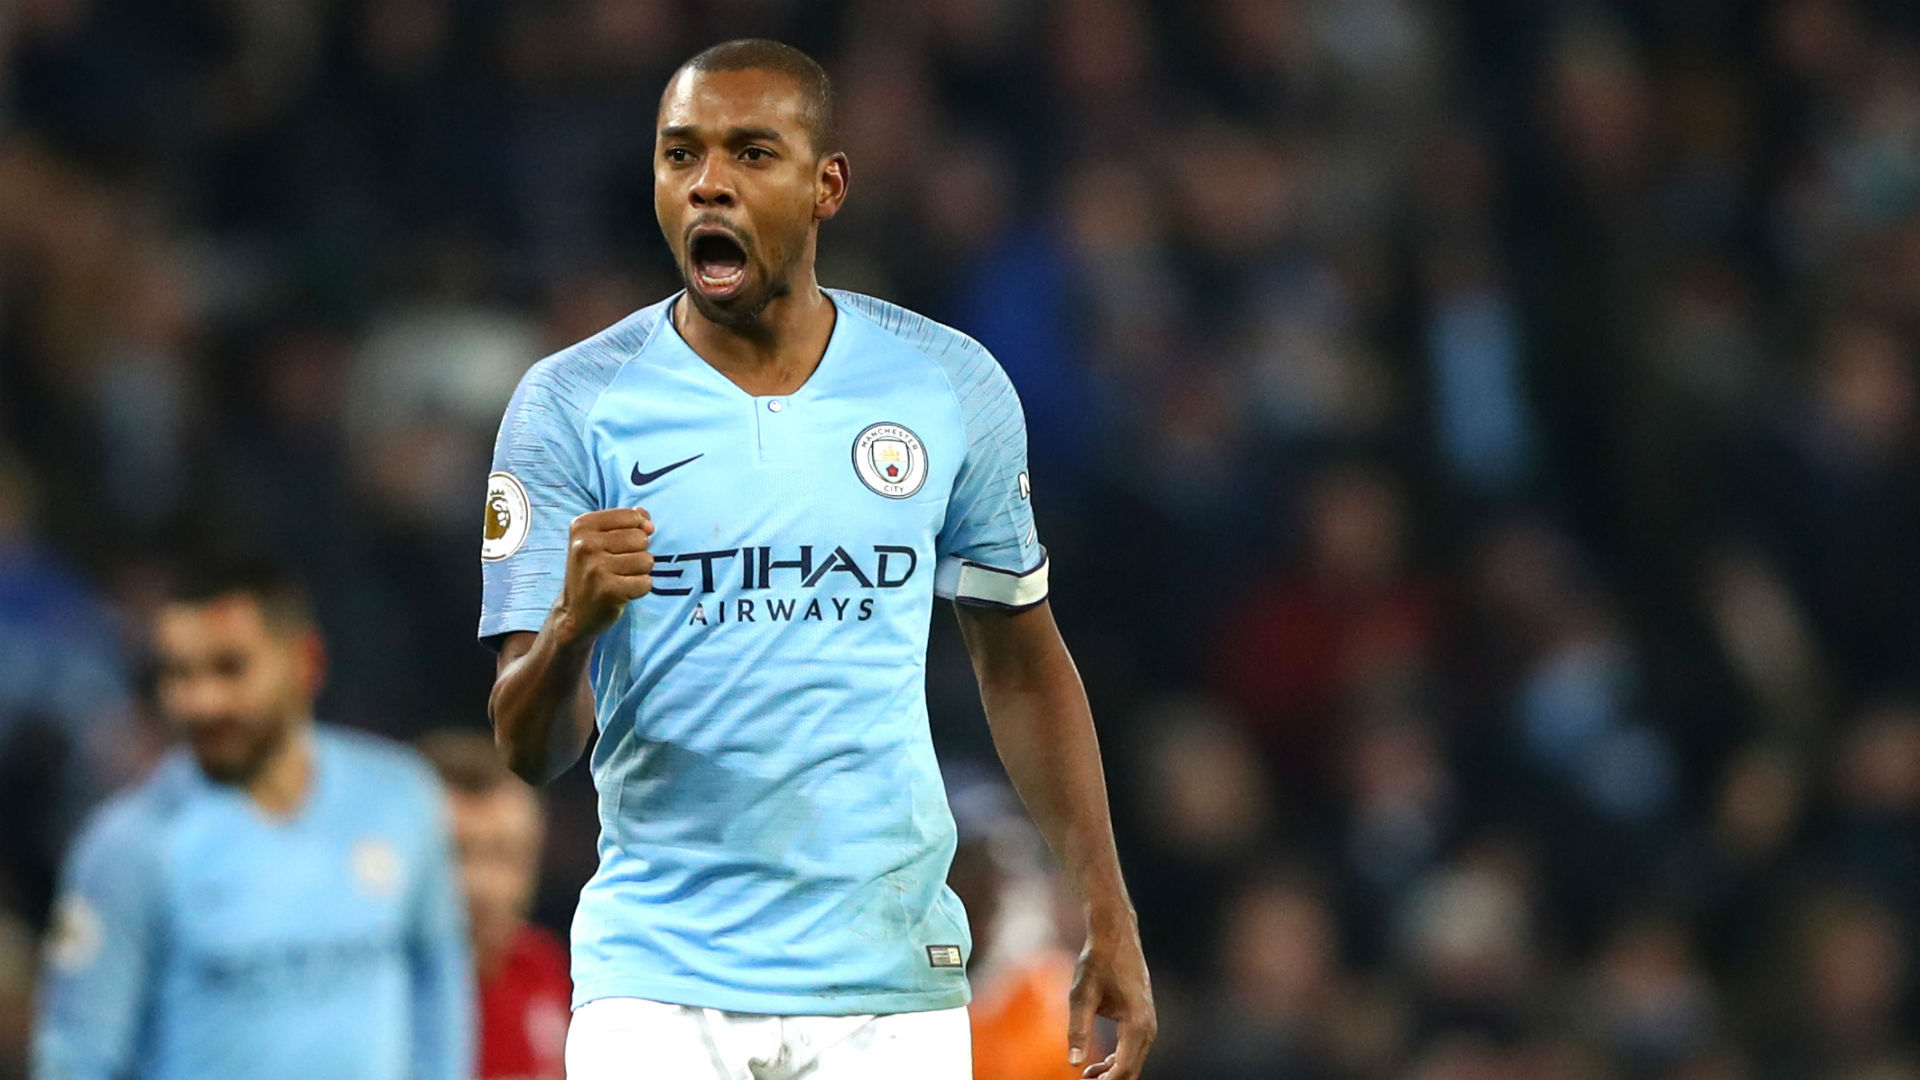 'Today was my opportunity' - Fernandinho settling in at centre-back amid Man City injury crisis